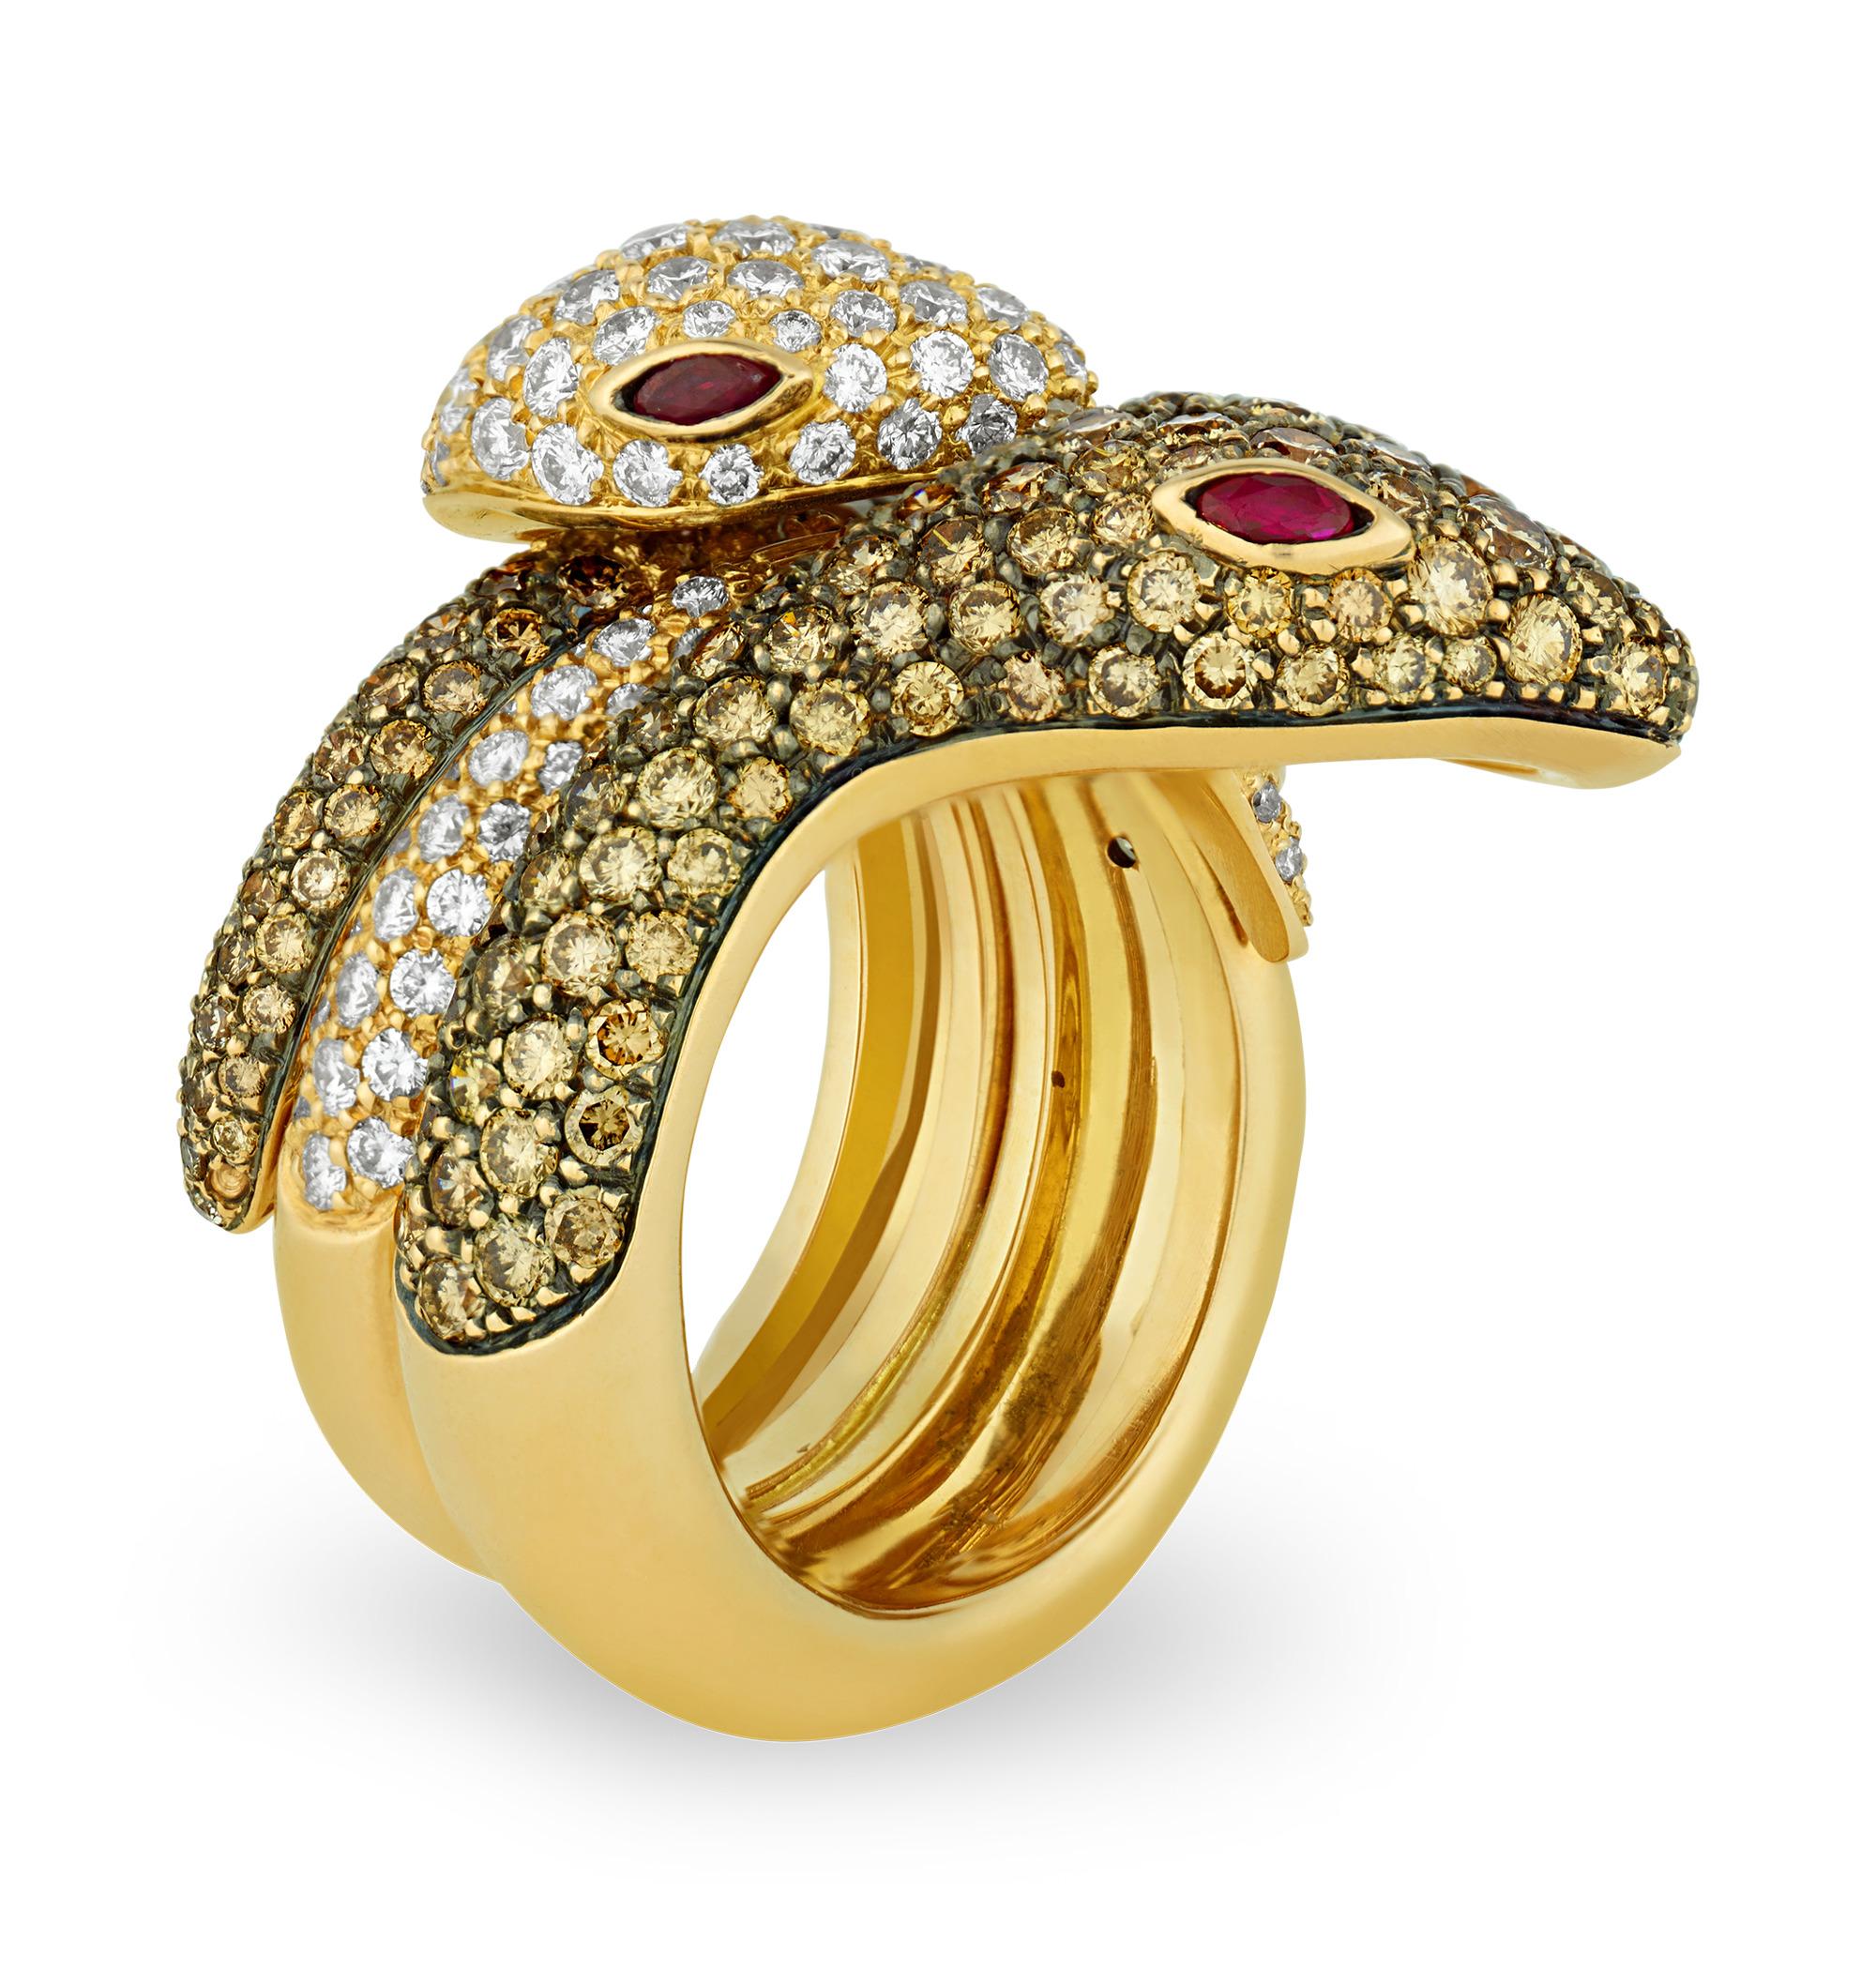 Slithering with sophistication, this unique piece intertwines two snakes into an elegant ring. Crafted of lustrous 18K gold, one snake is set with sparkling white diamonds while the other is set with exquisite champagne diamonds. Each serpent is